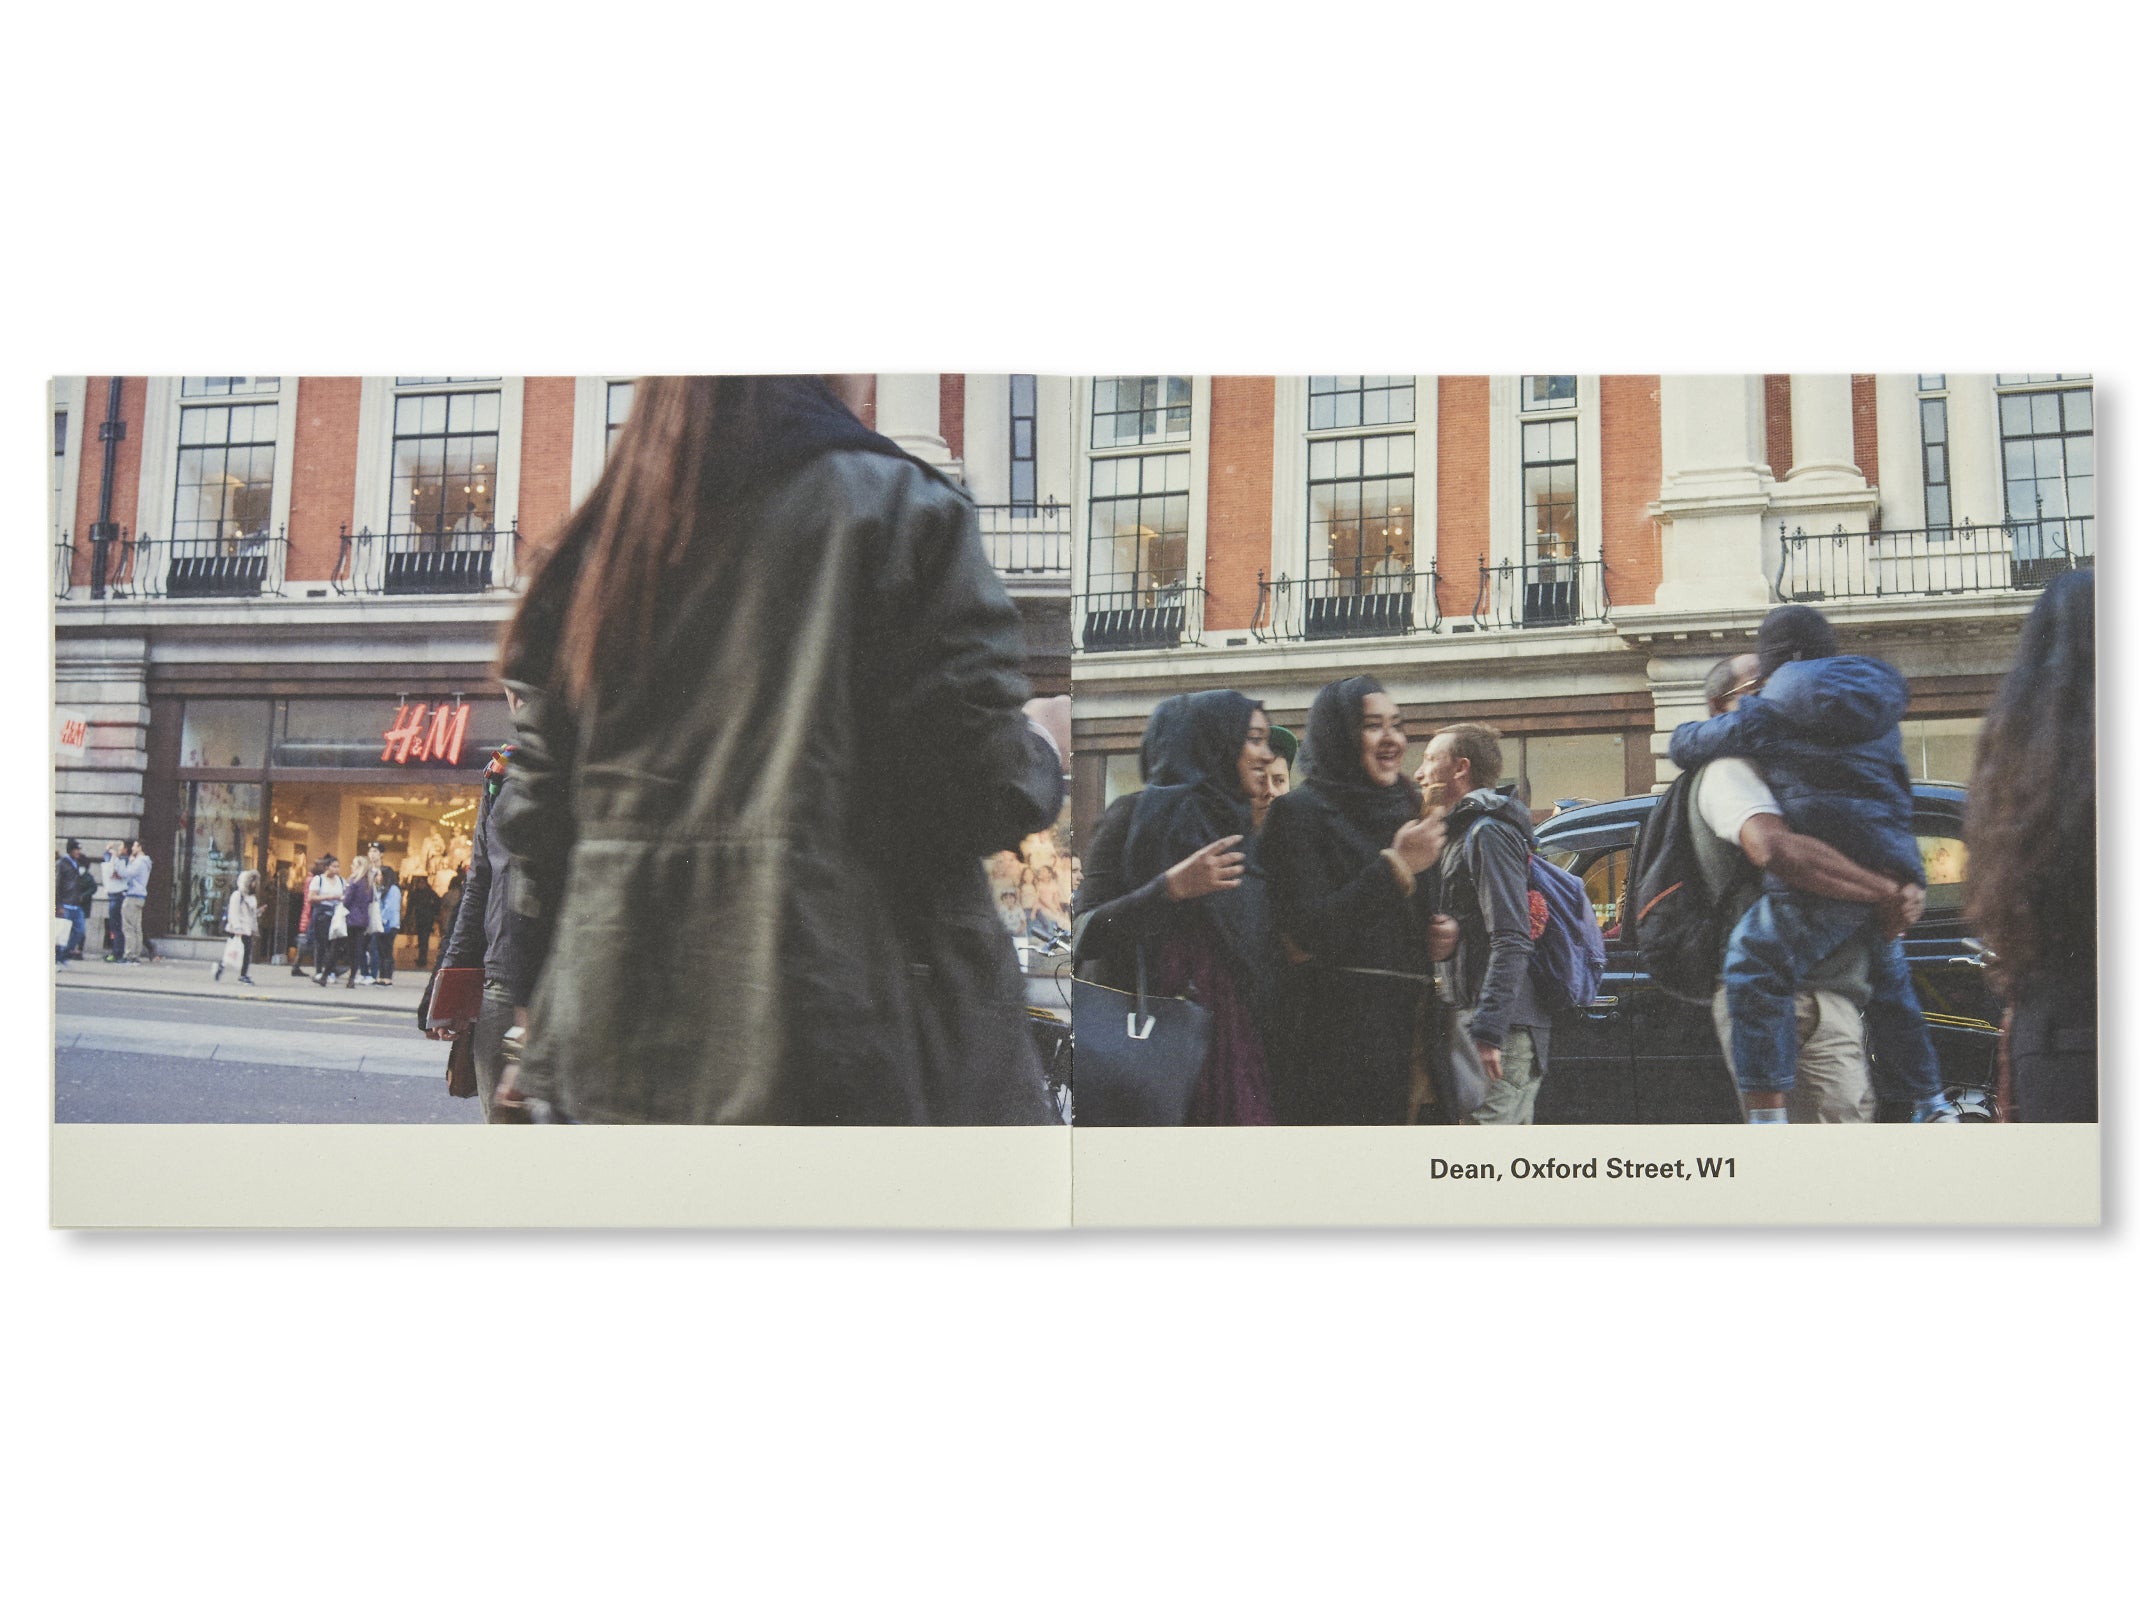 THE PEOPLE ON THE STREET by Nigel Shafran